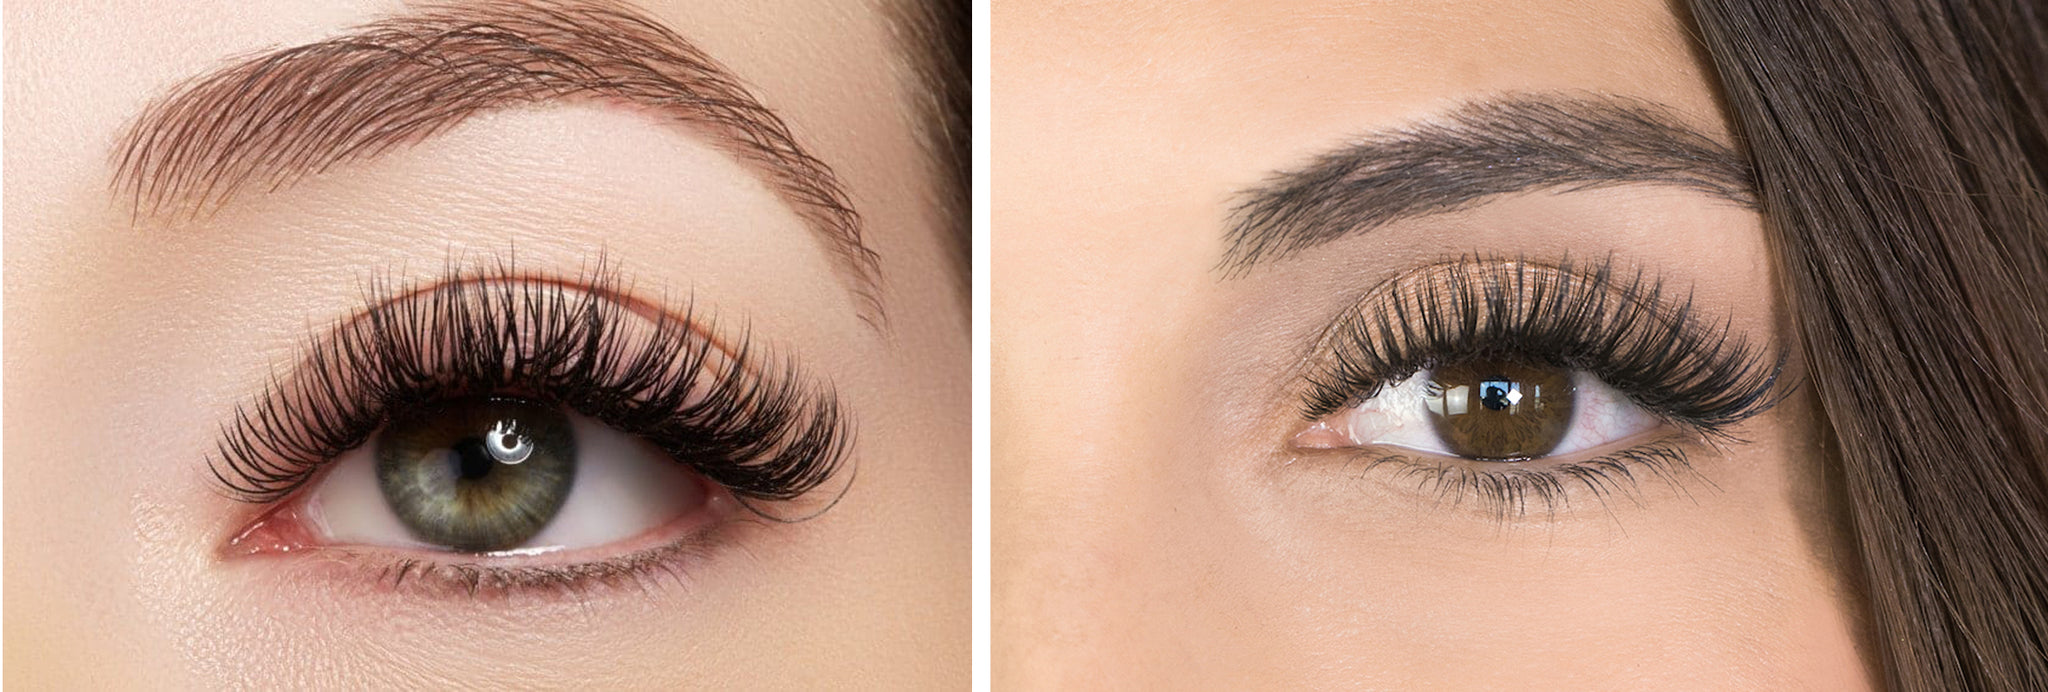 An image displaying the outcome of a trending lash style: hybrid lashes, showcasing a blend of classic and volume lash techniques. The result is a textured, fuller lash appearance with a mix of lengths and thickness, offering a balanced yet striking look